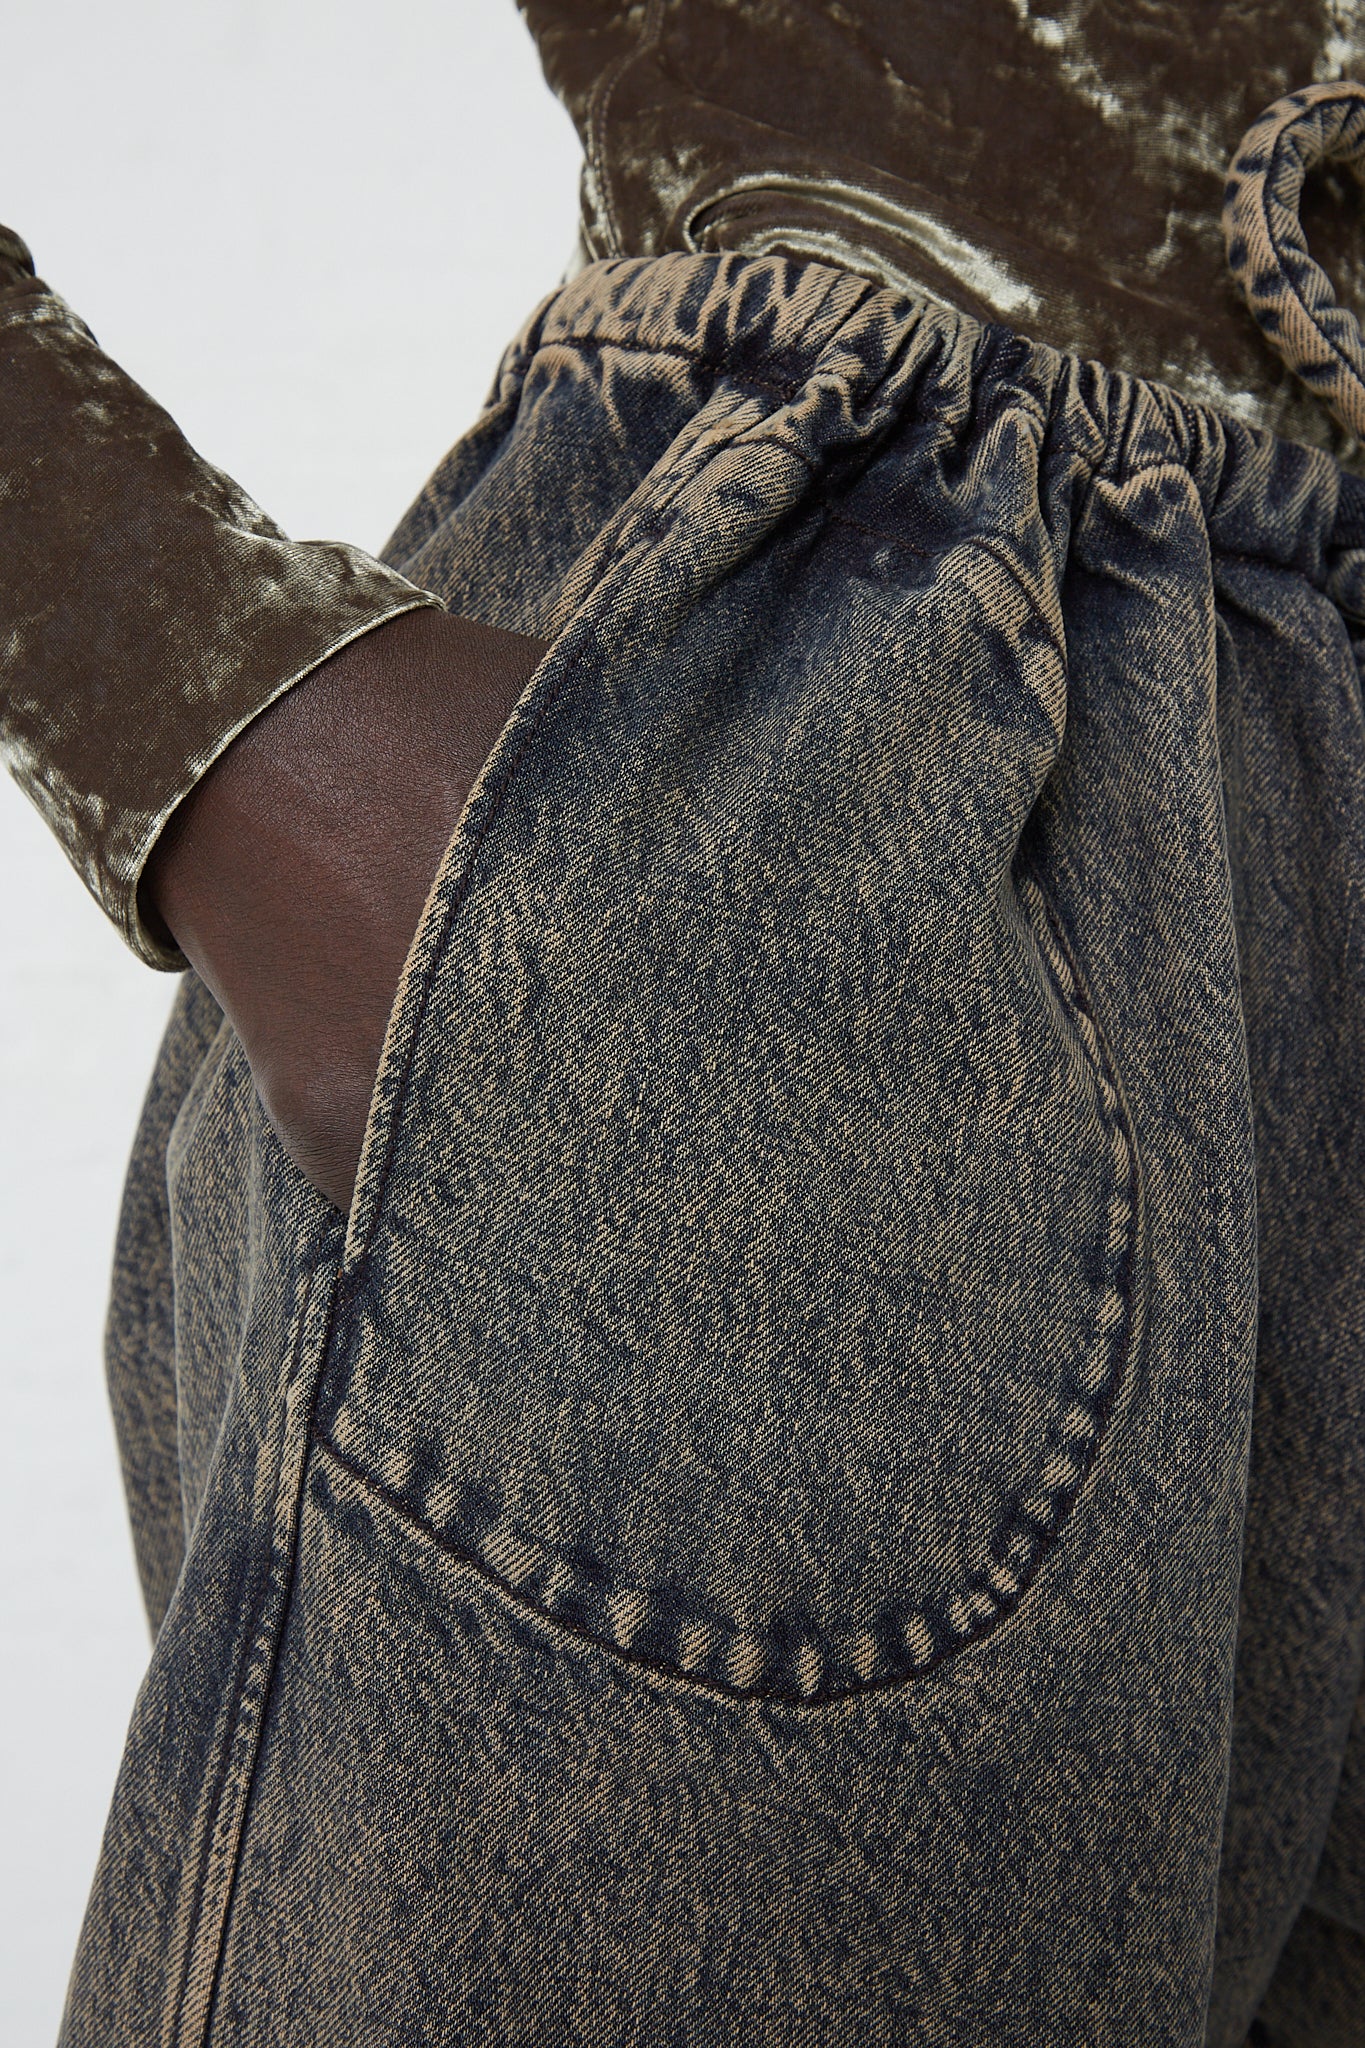 A close up of a woman wearing Veronique Leroy's Denim Belted Trousers in Acid Wash Denim with pockets.